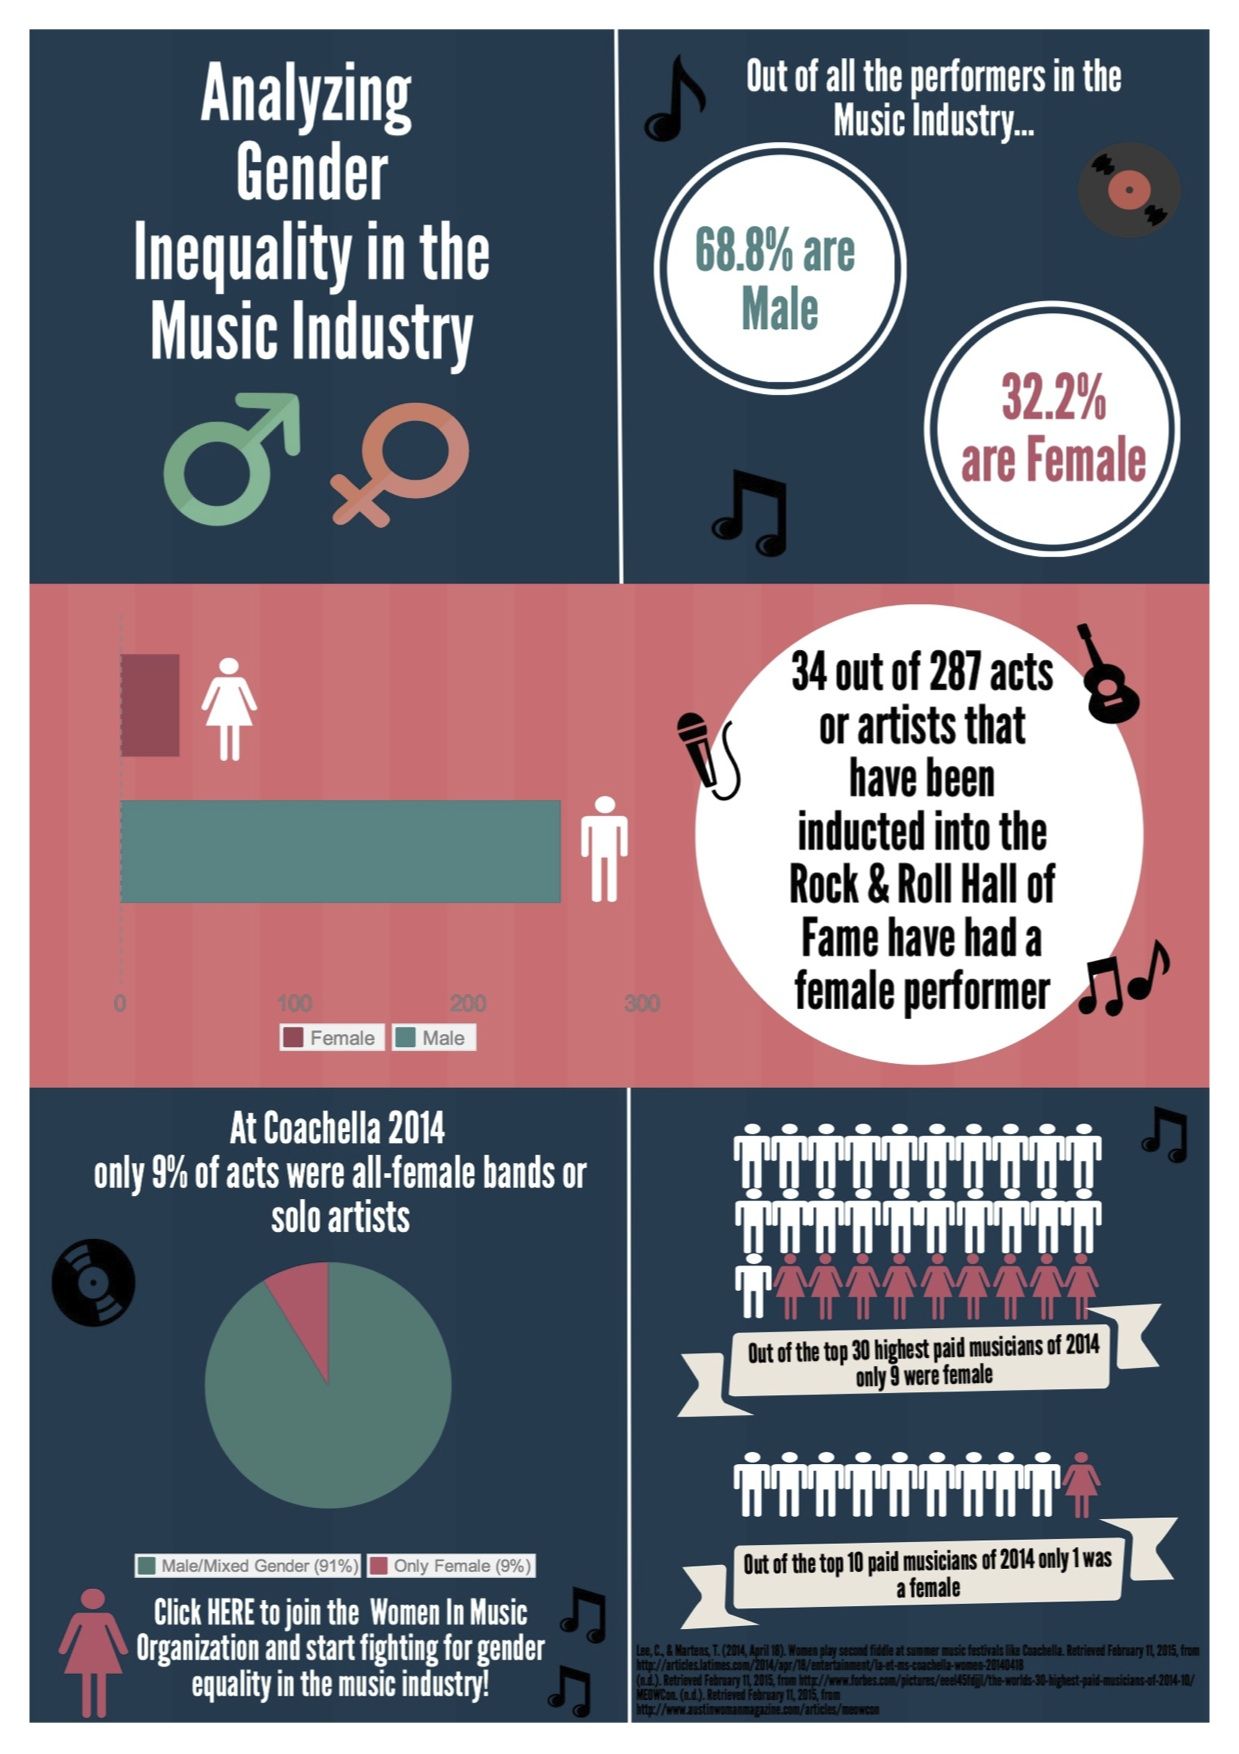 Gender Inequality in the Music Industry